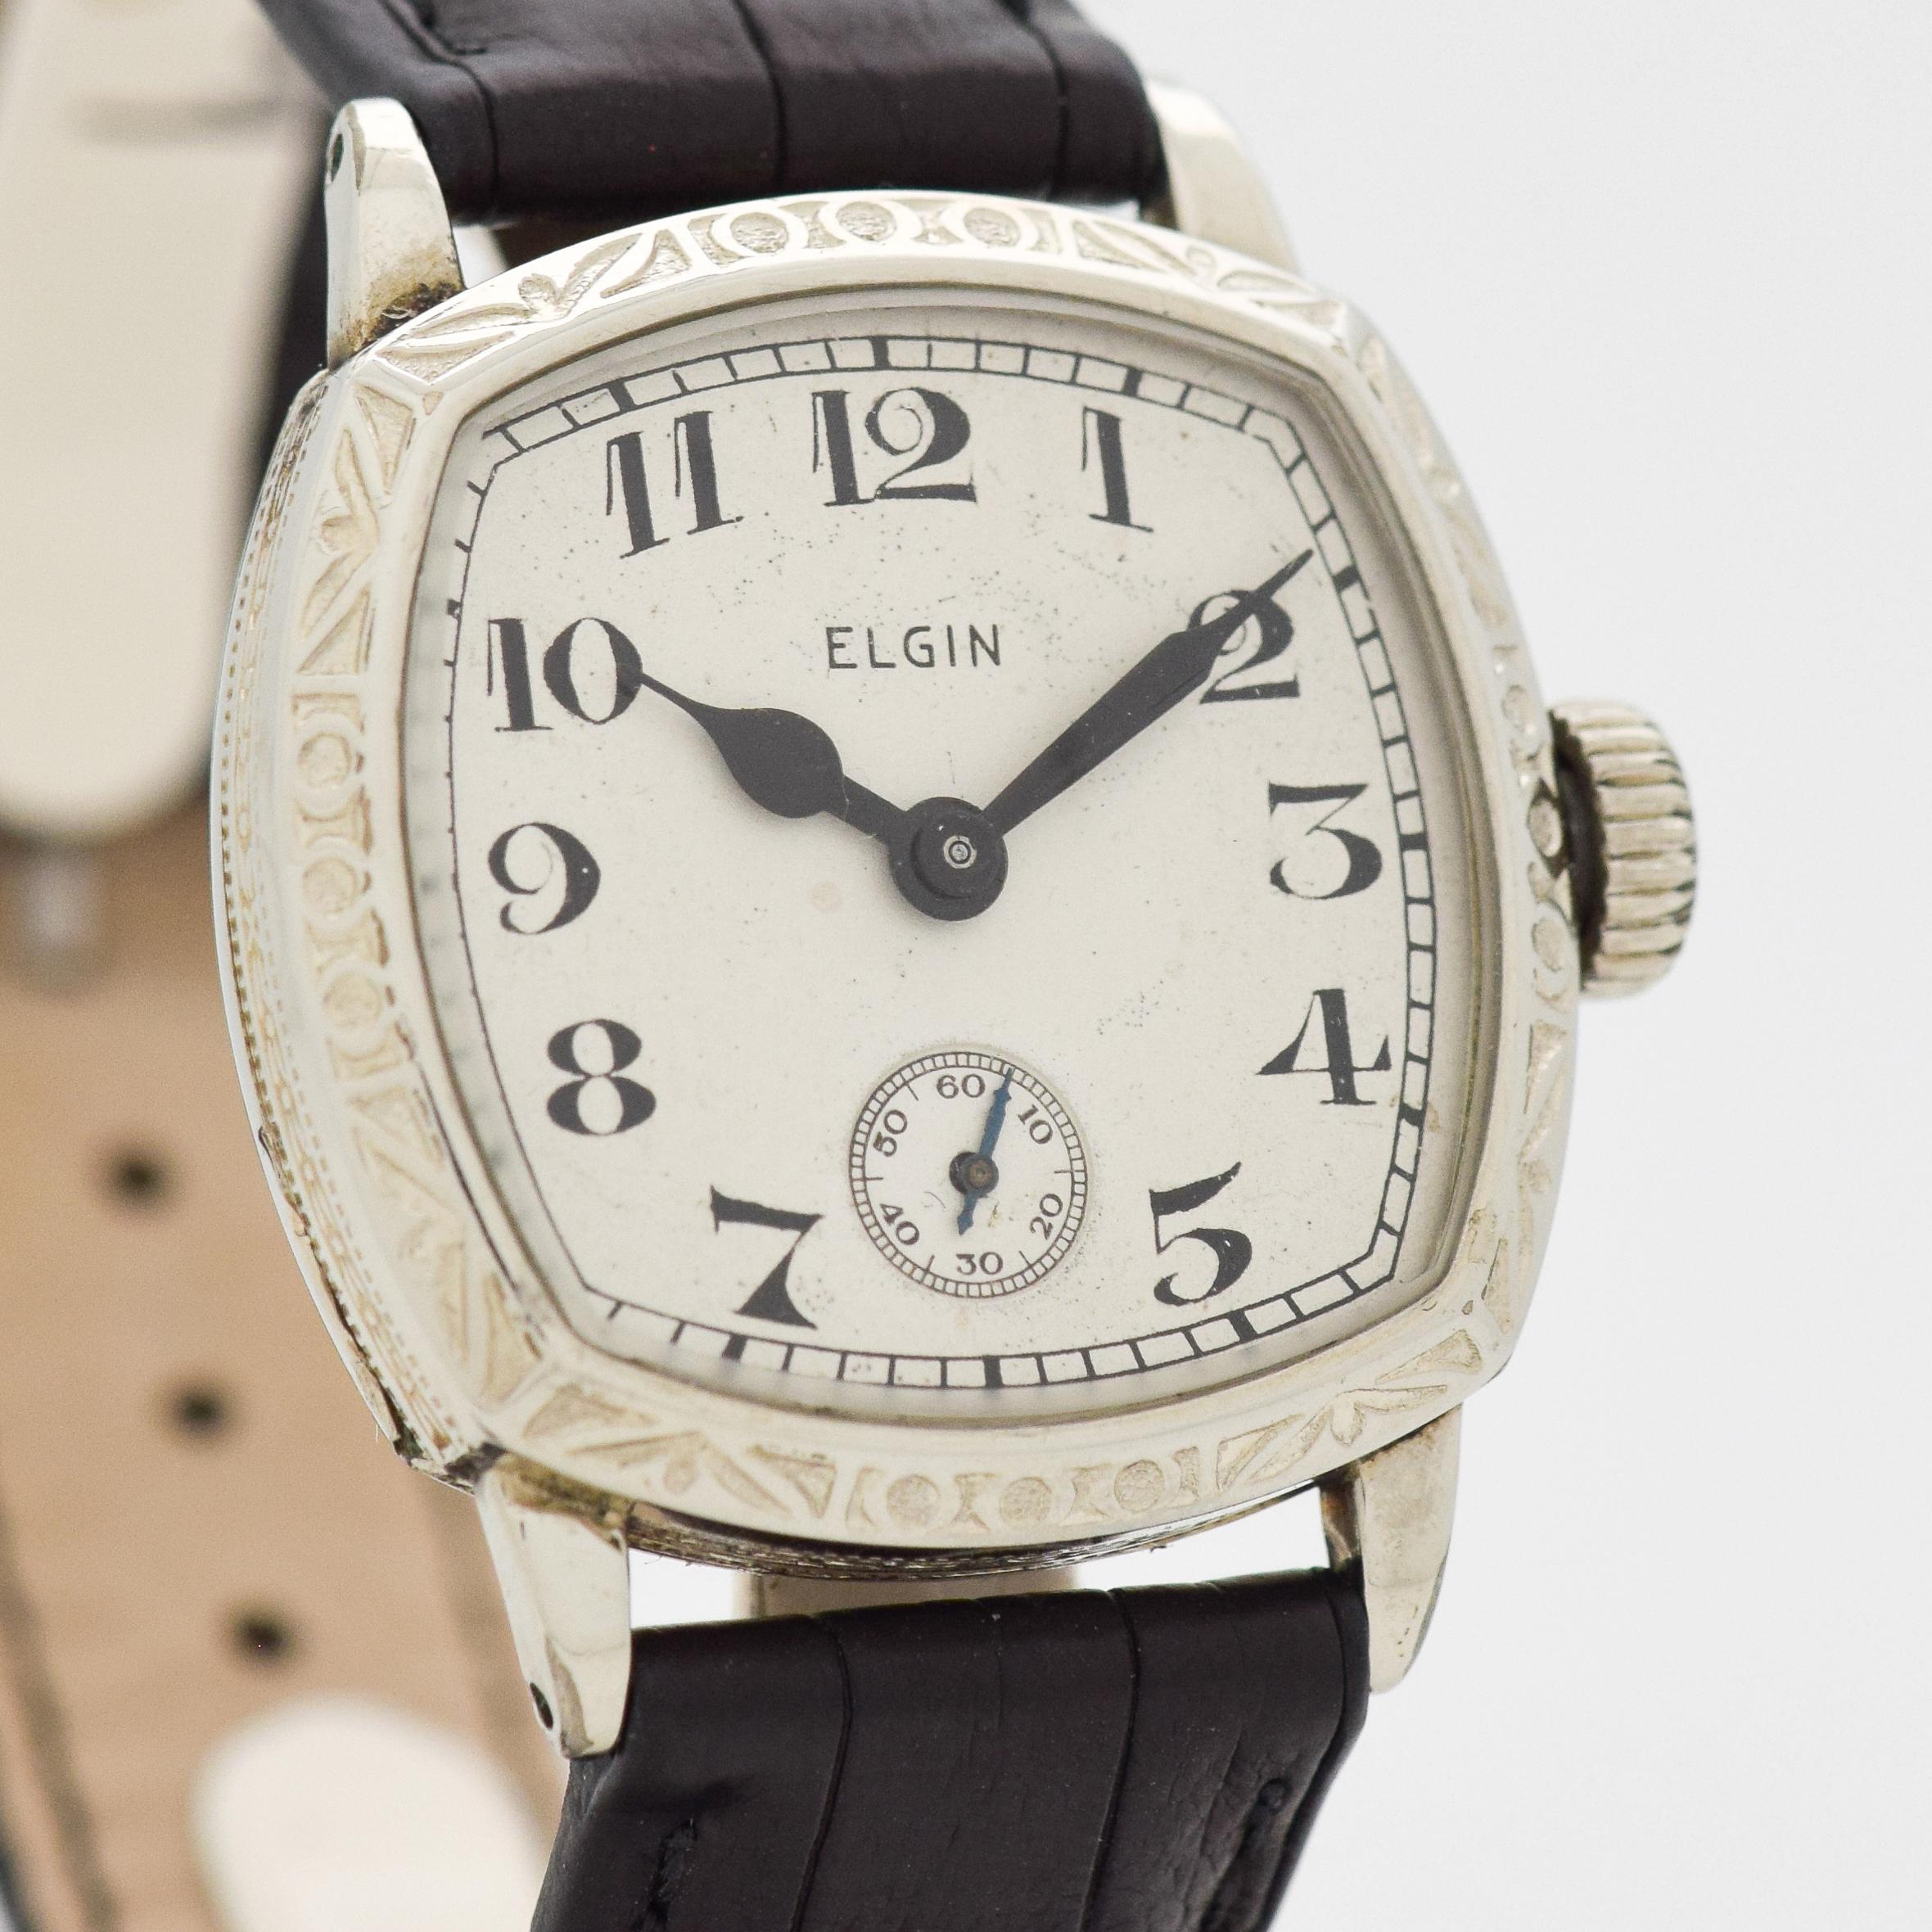 1929 Vintage Elgin wristwatch. 14K White Gold filled, cushion-style case. Powered by a 7-jewel, manual caliber 462 movement. 30mm x 36mm lug to lug (1.18 in. x 1.42 in.) - Equipped with a black-colored Matte Alligator watch strap.